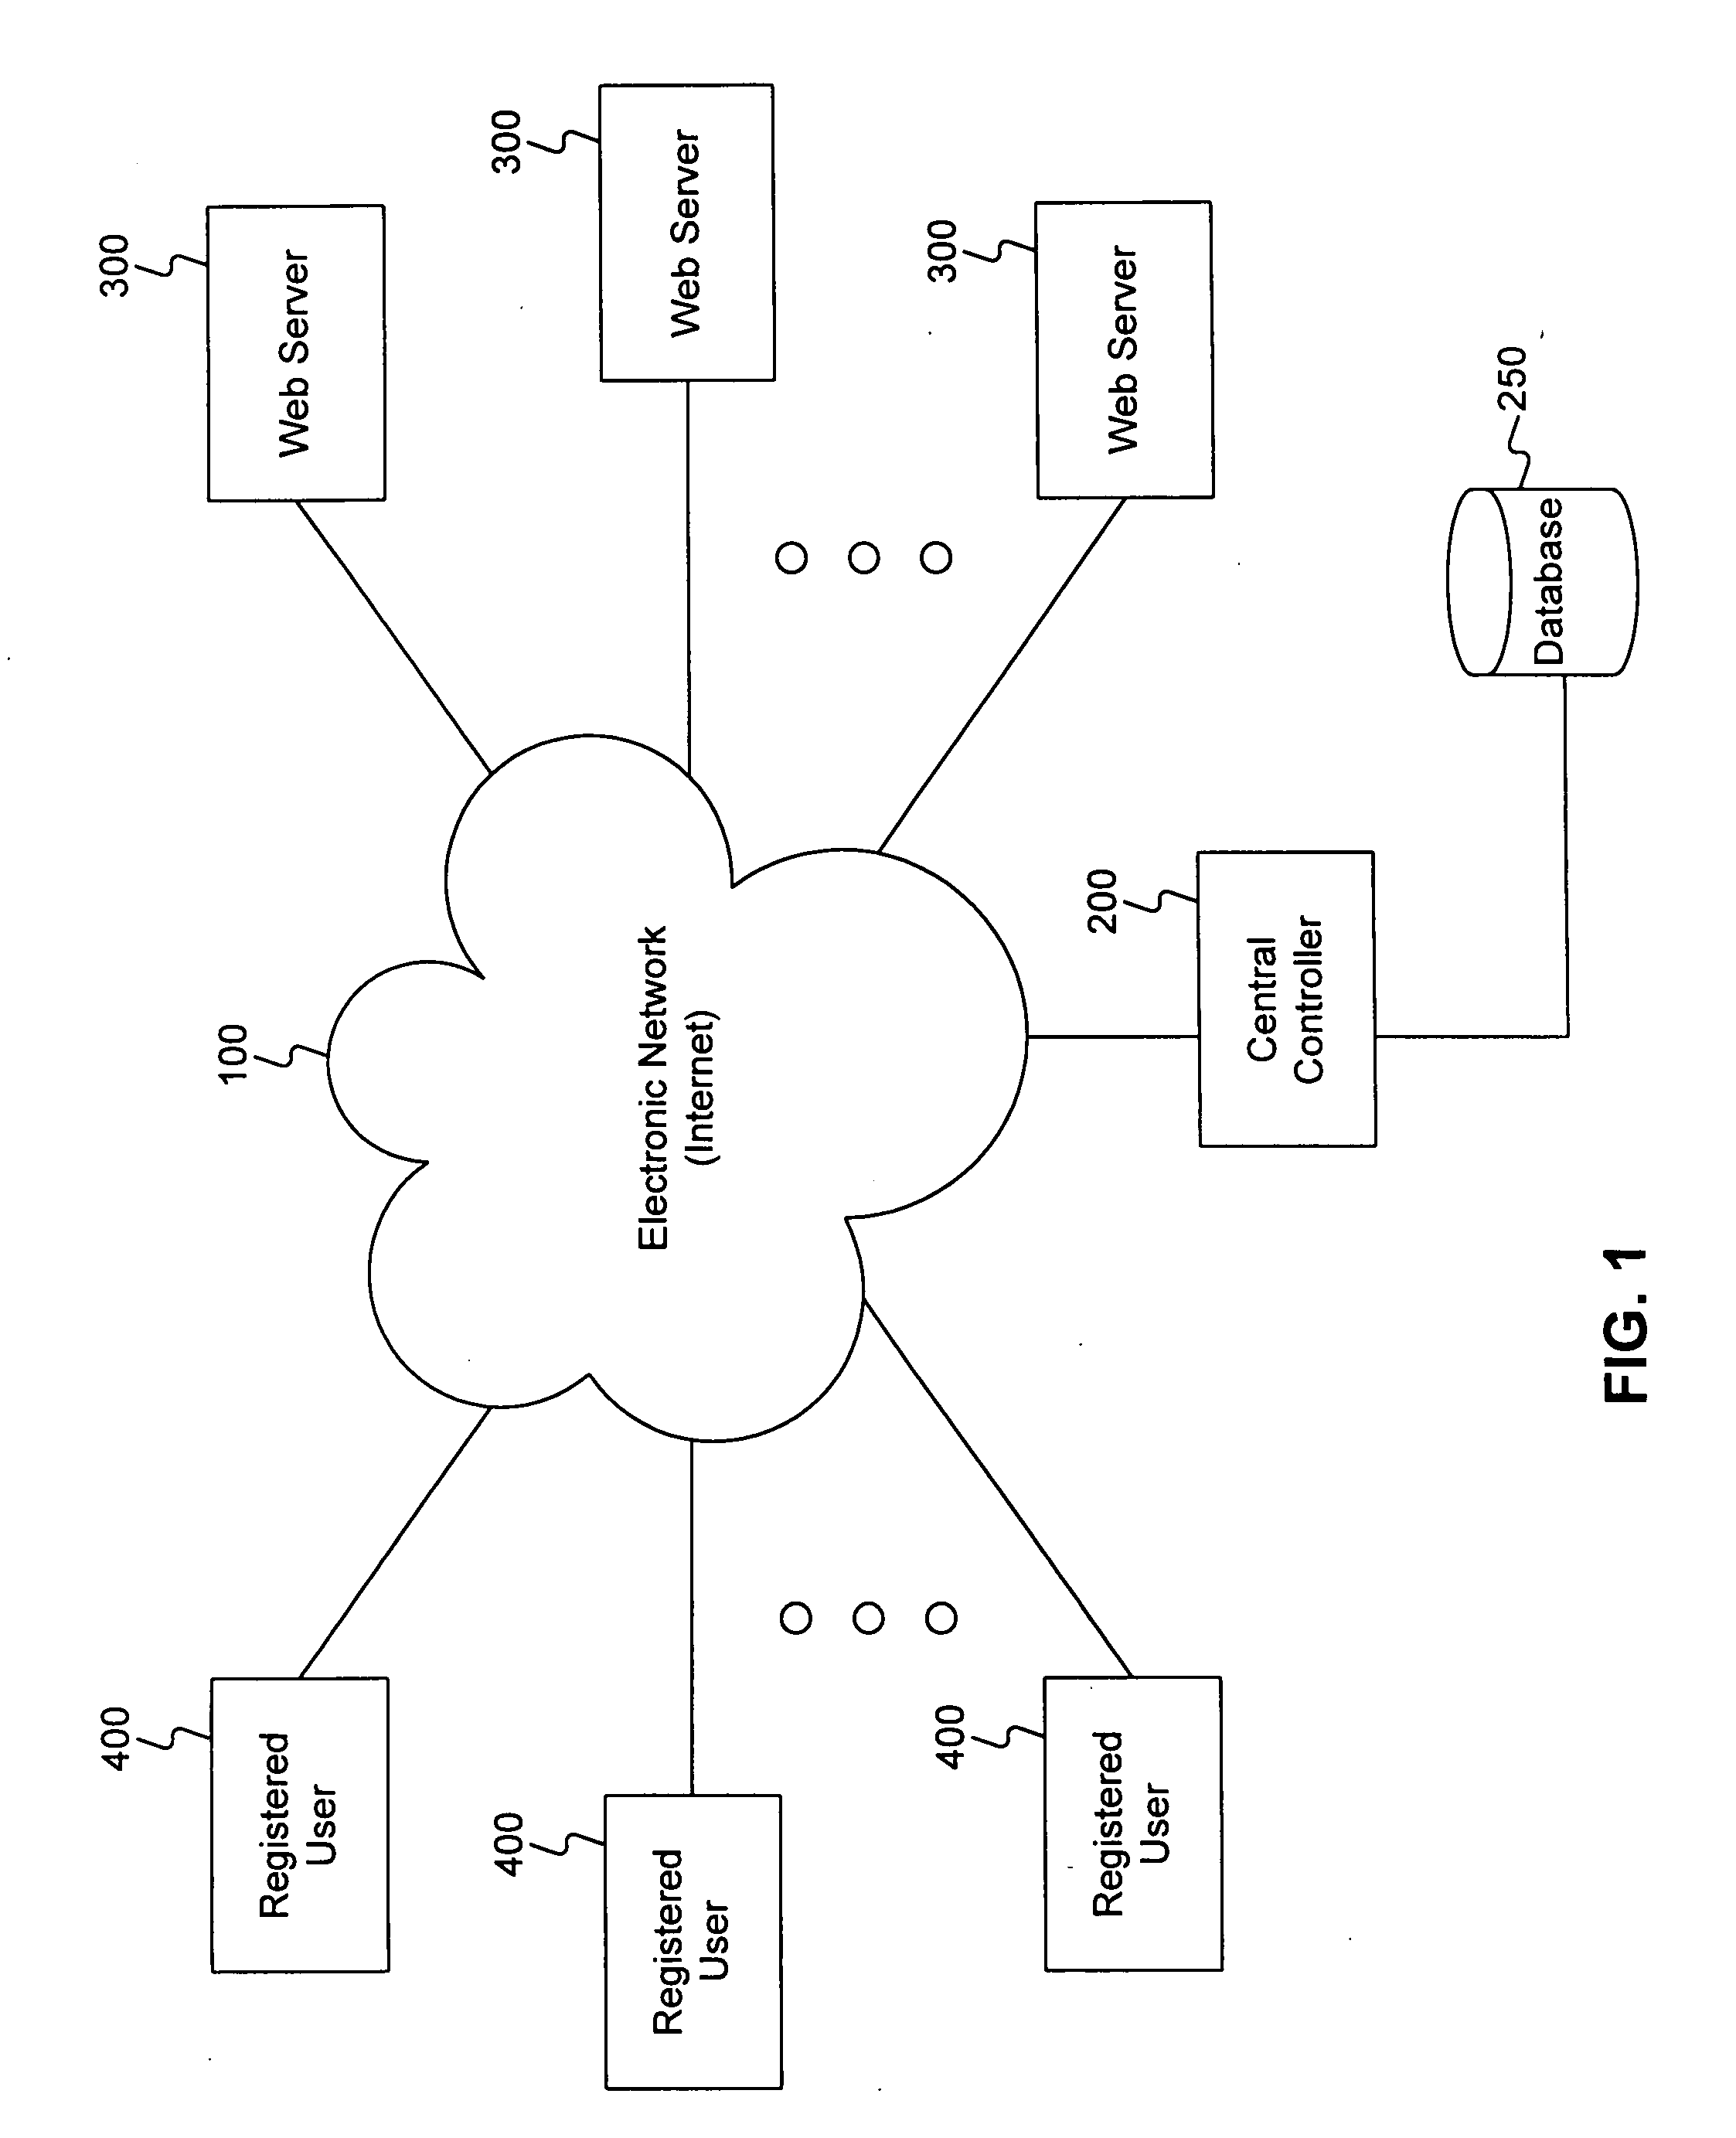 Method and apparatus for generating a sale offer to selected individuals over electronic network systems